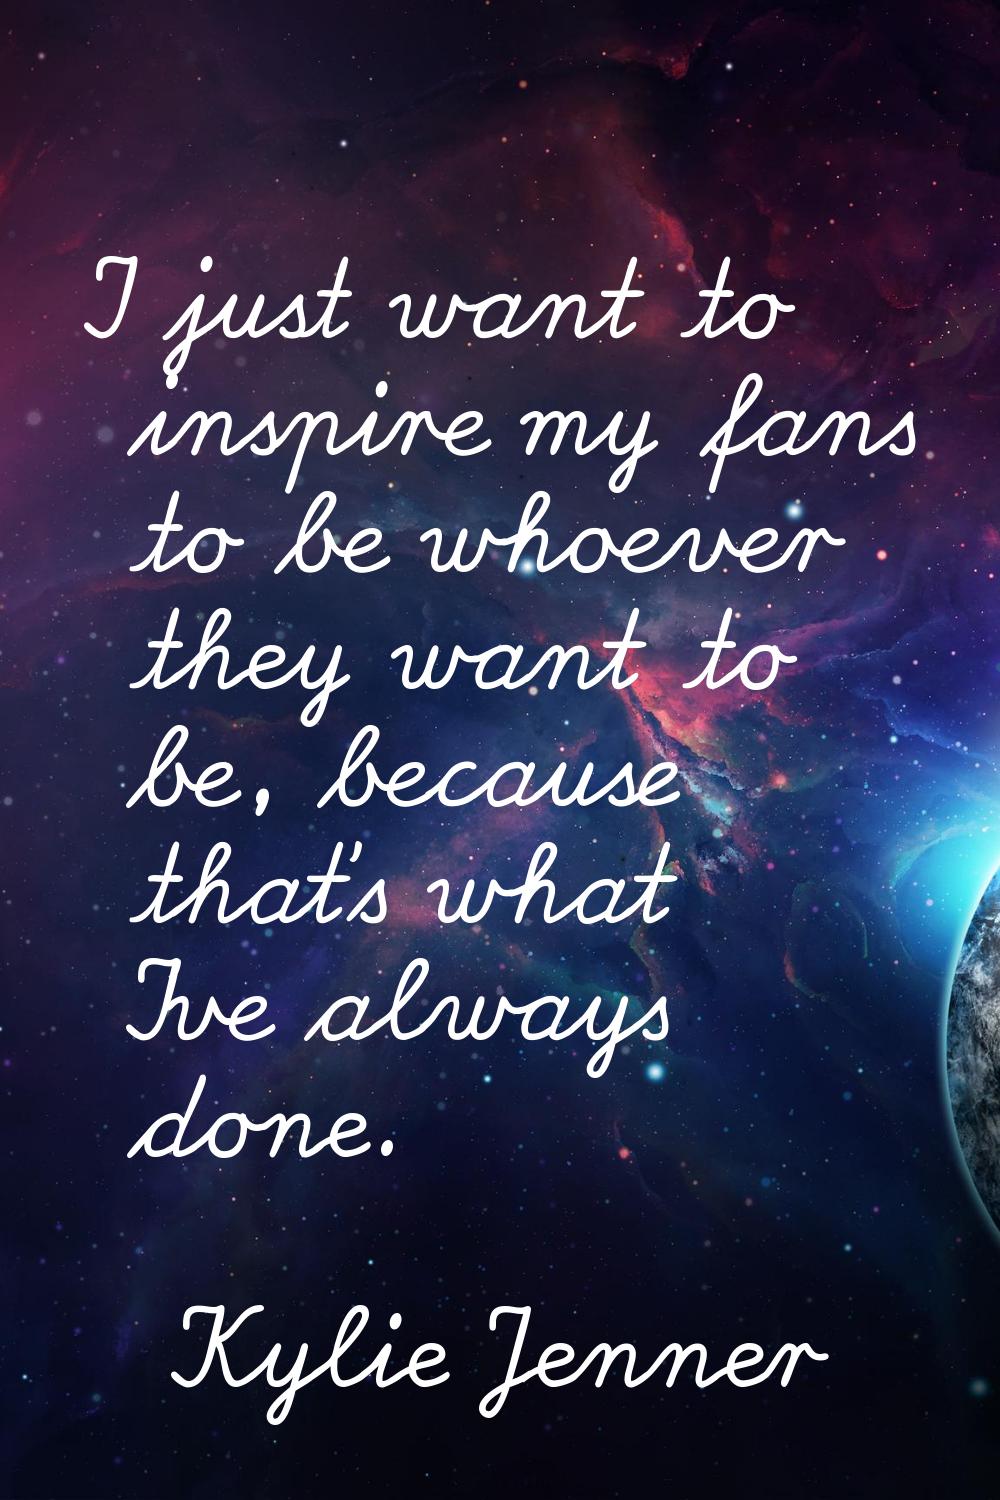 I just want to inspire my fans to be whoever they want to be, because that's what I've always done.